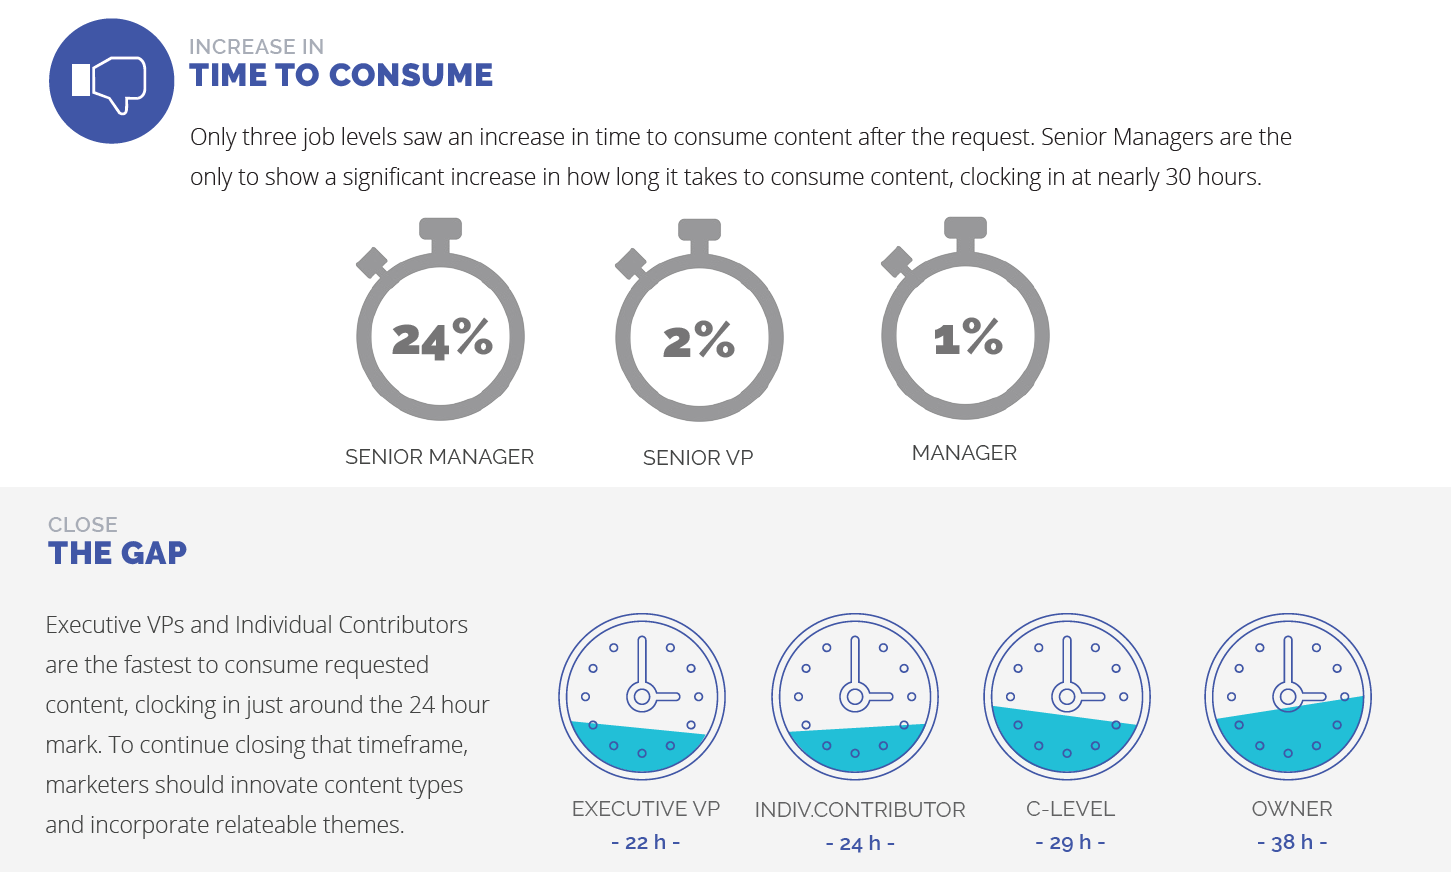 As published in NetLine's 2019 Content Consumption Report Senior Managers were the only group to take longer to consume content compared to the prior year.